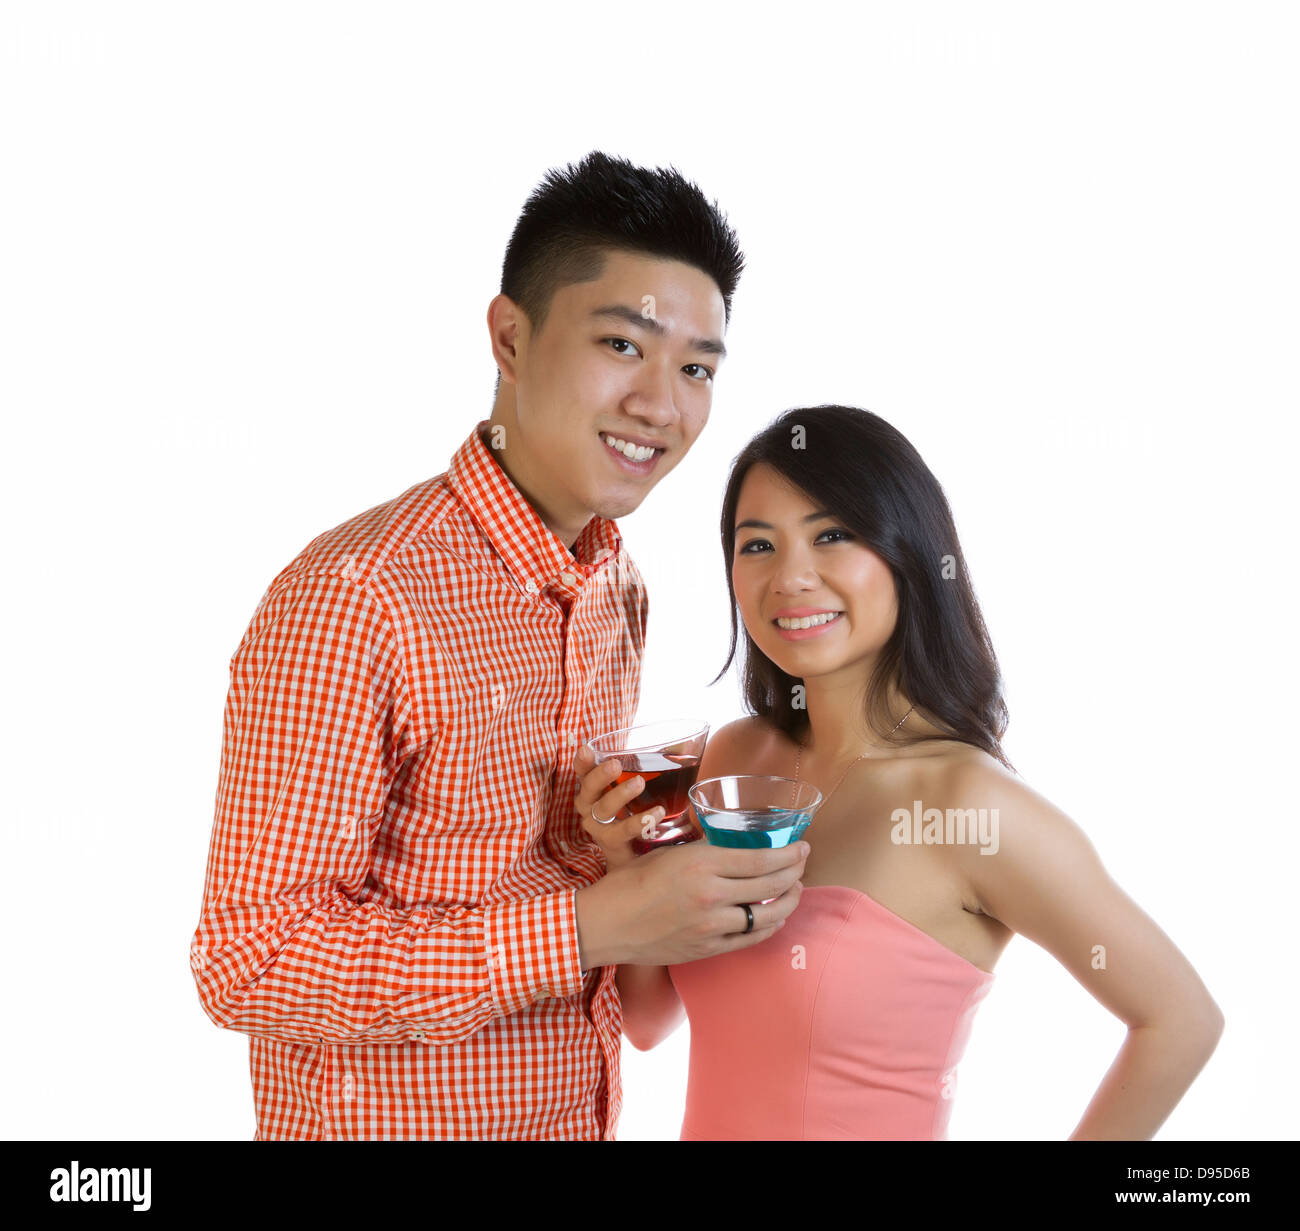 Photo of young adult couple holding mixed drinks while smiling on white background Stock Photo